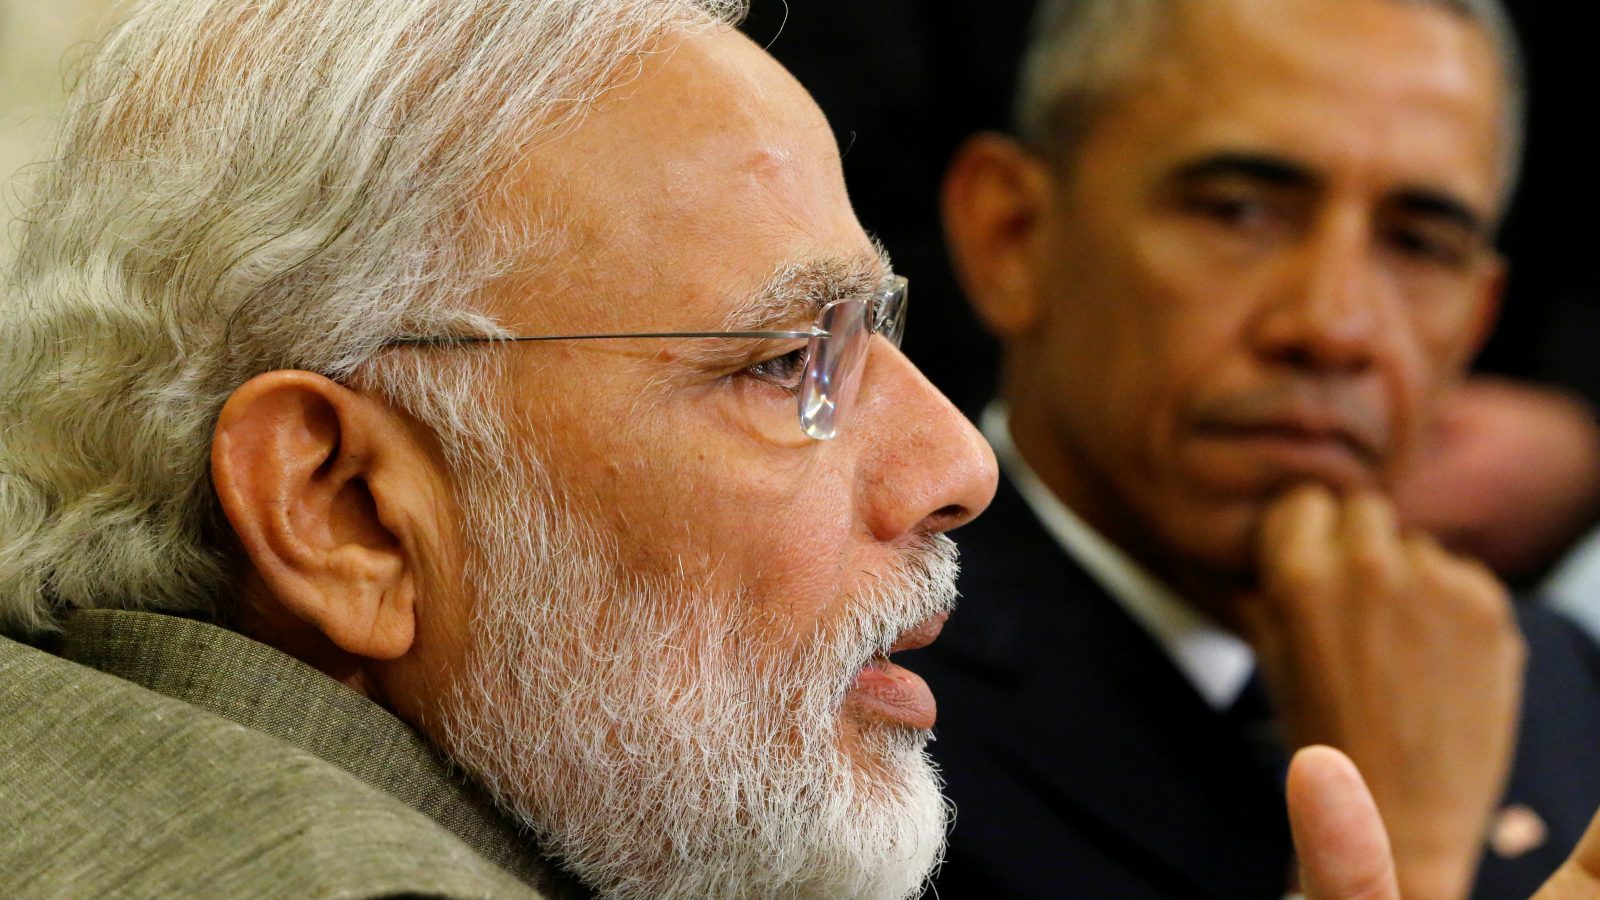 India's Prime Minister Narendra Modi (L) delivers remarks to reporters after meeting with U.S. President Barack Obama (R) in the Oval Office at the White House in Washington, U.S. June 7, 2016.